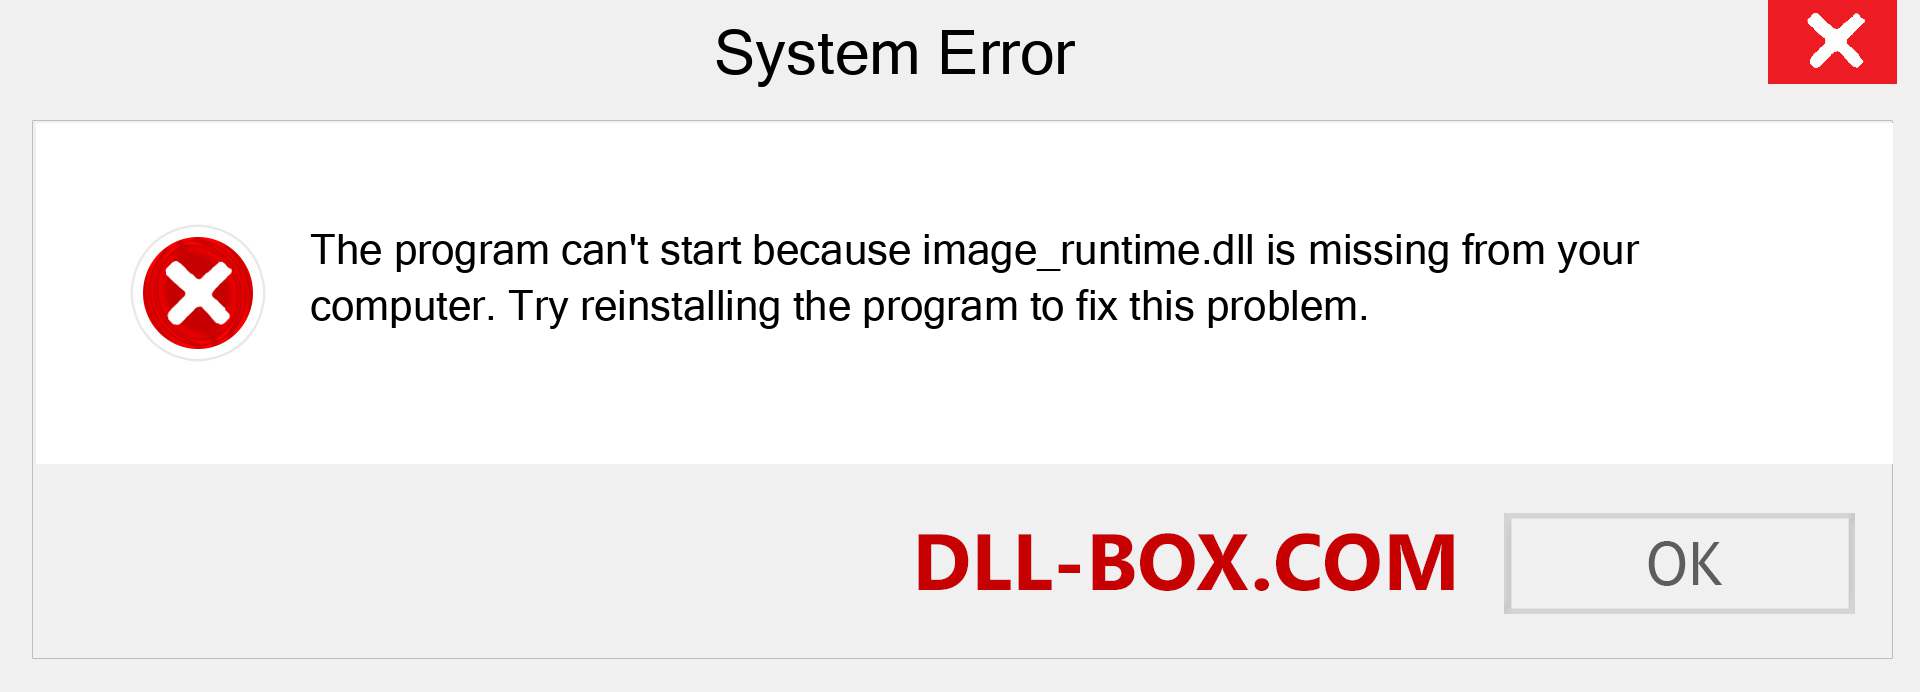  image_runtime.dll file is missing?. Download for Windows 7, 8, 10 - Fix  image_runtime dll Missing Error on Windows, photos, images